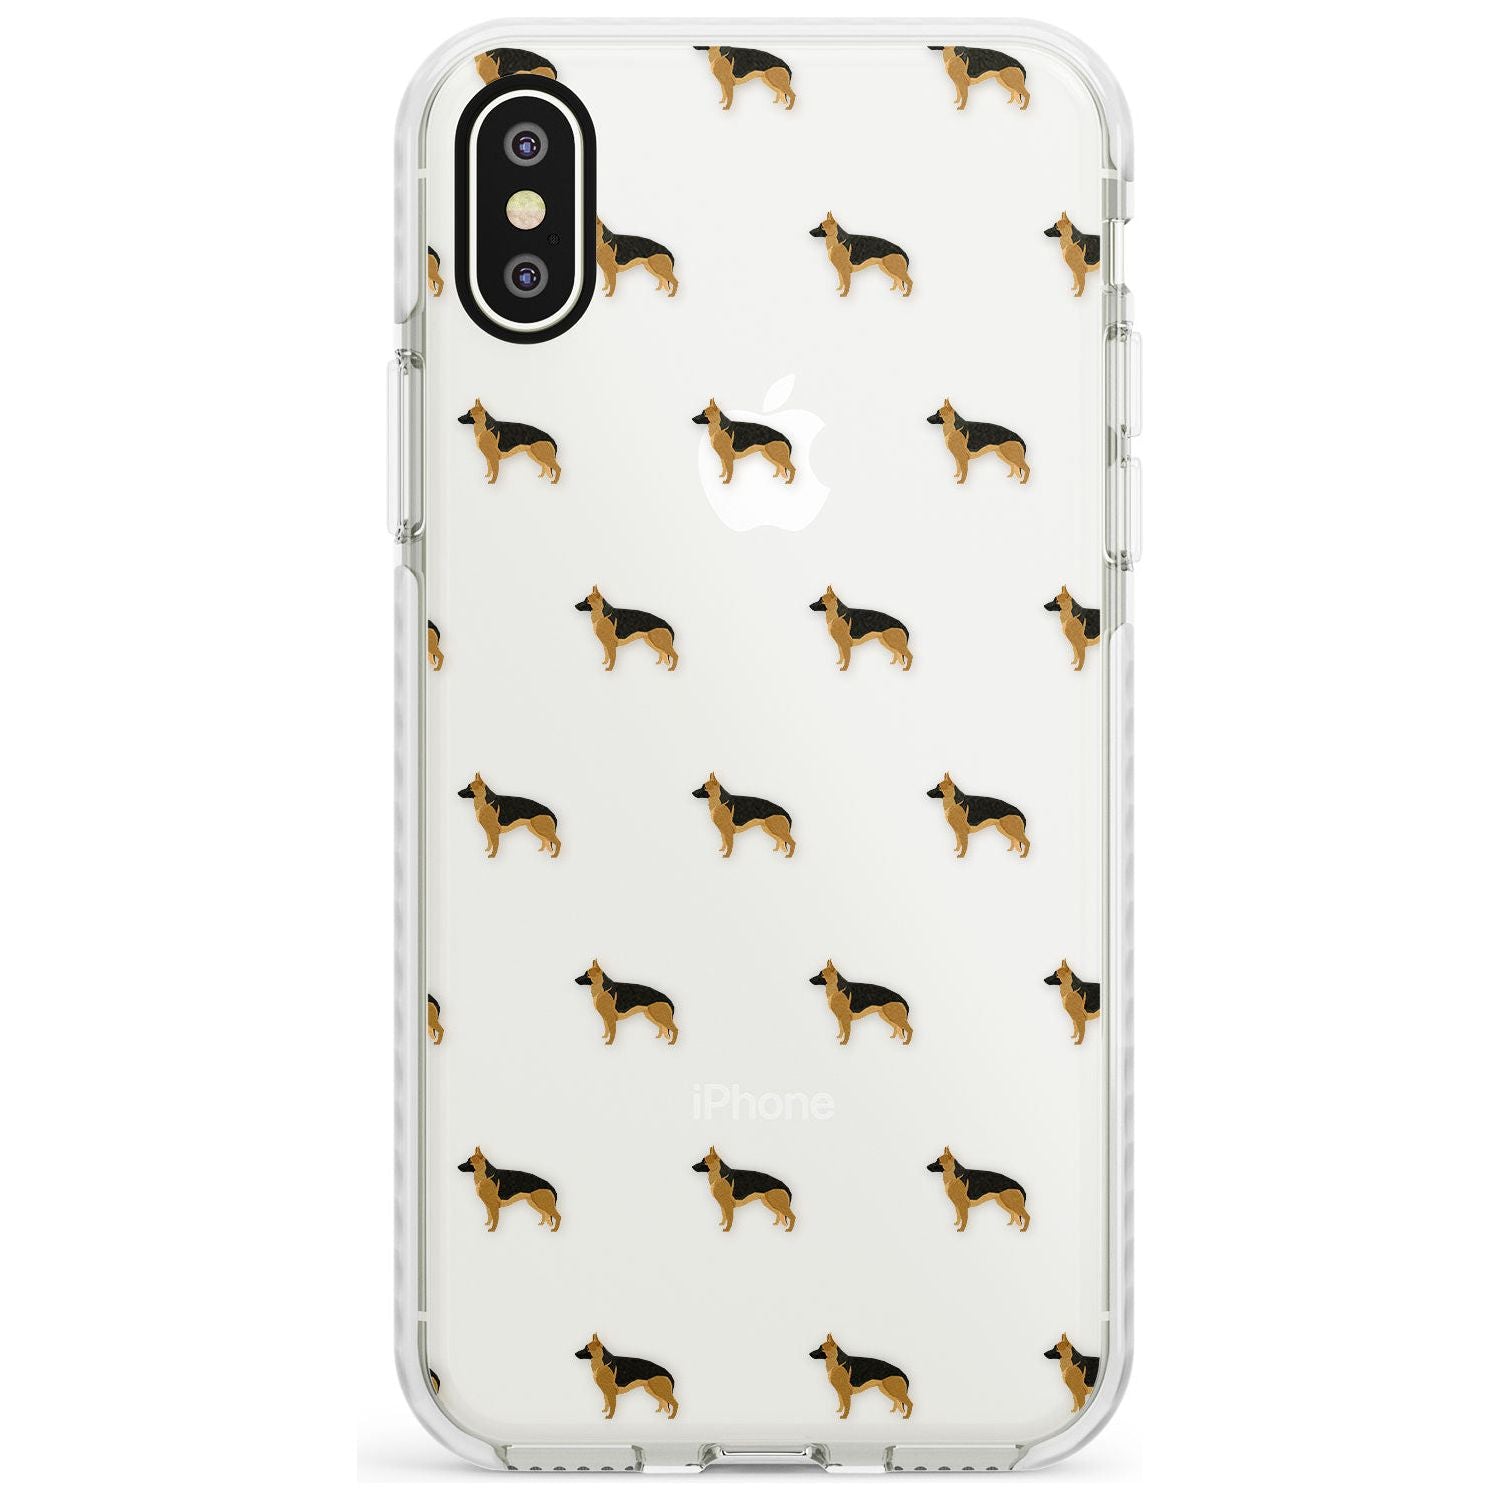 German Sherpard Dog Pattern Clear Impact Phone Case for iPhone X XS Max XR